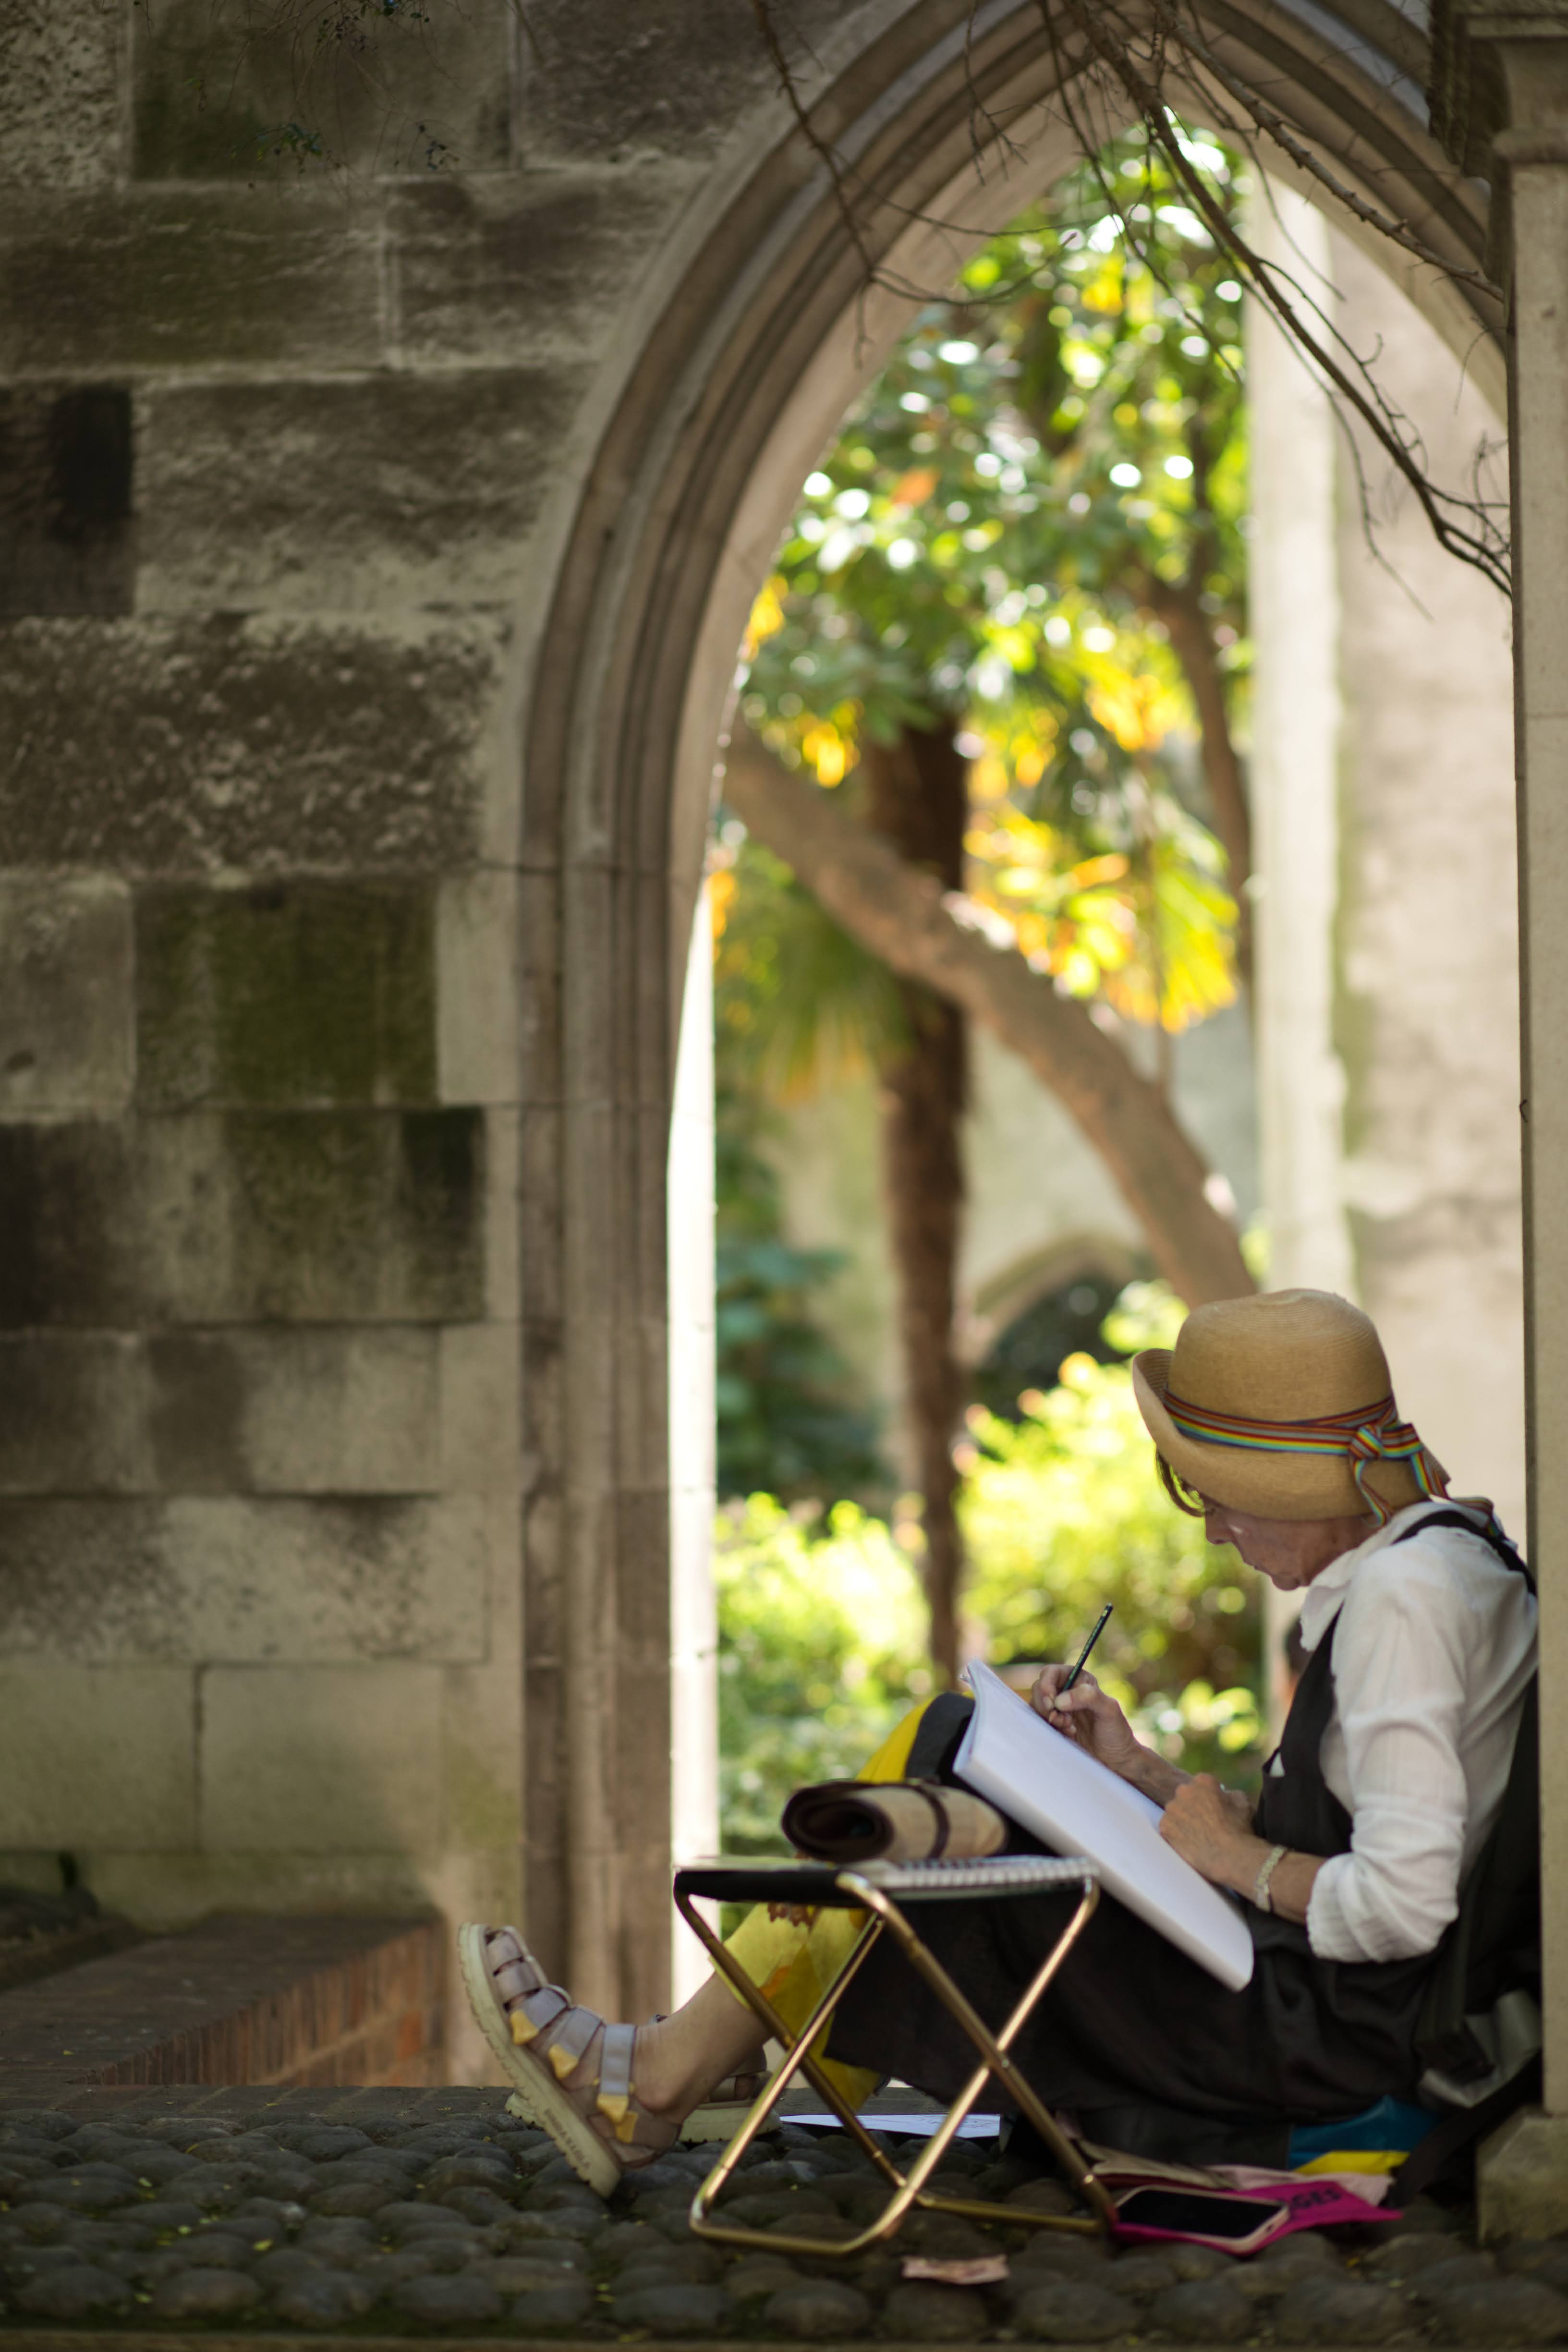 A woman reading under a stone archway